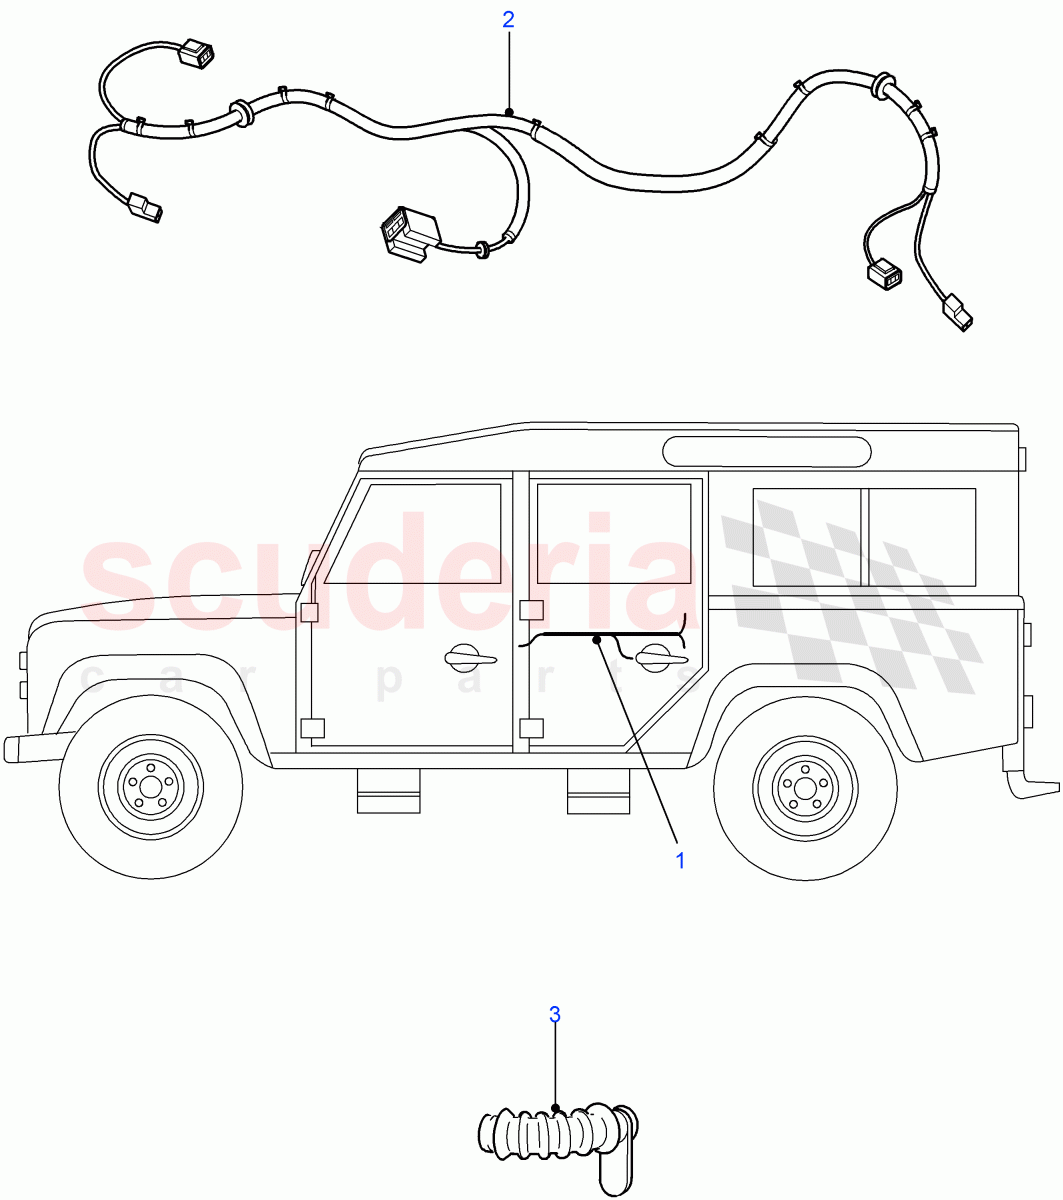 Harness-Door Rear(Crew Cab Pick Up,110" Wheelbase,Chassis Crew Cab,130" Wheelbase,Station Wagon - 5 Door,Crew Cab HCPU)((V)FROM7A000001) of Land Rover Land Rover Defender (2007-2016)